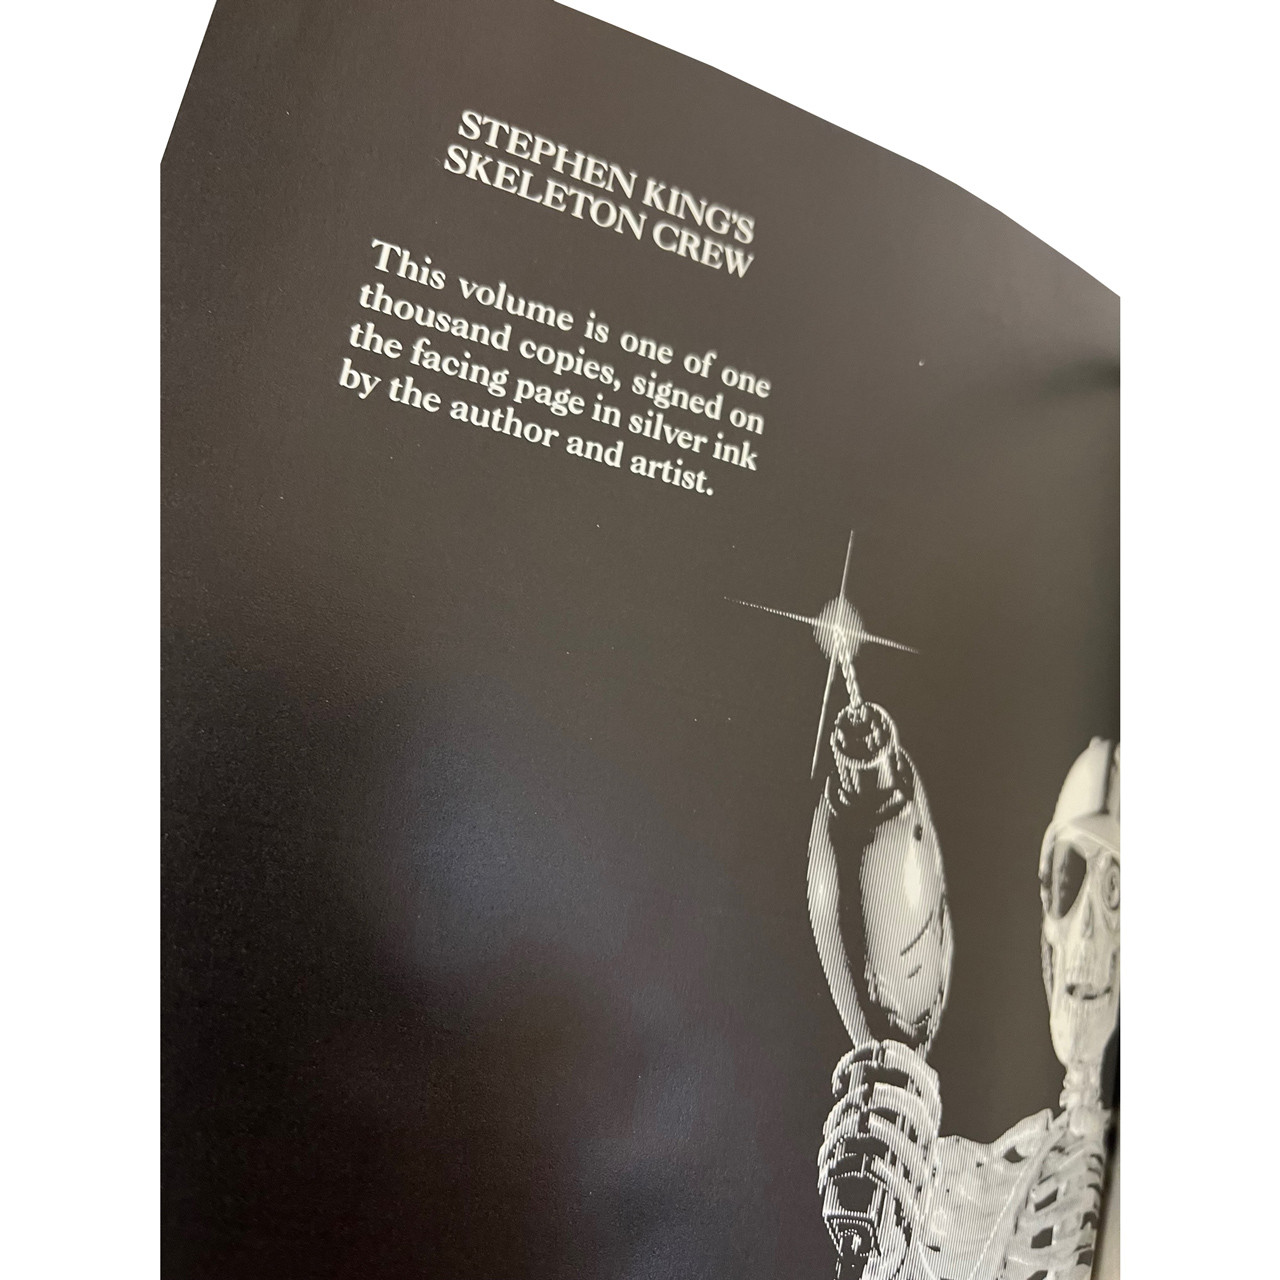 Stephen King "Skeleton Crew" Slipcased Signed Deluxe Limited First Edition No. 308 of 1,000 w/Color Poster [Very Fine]